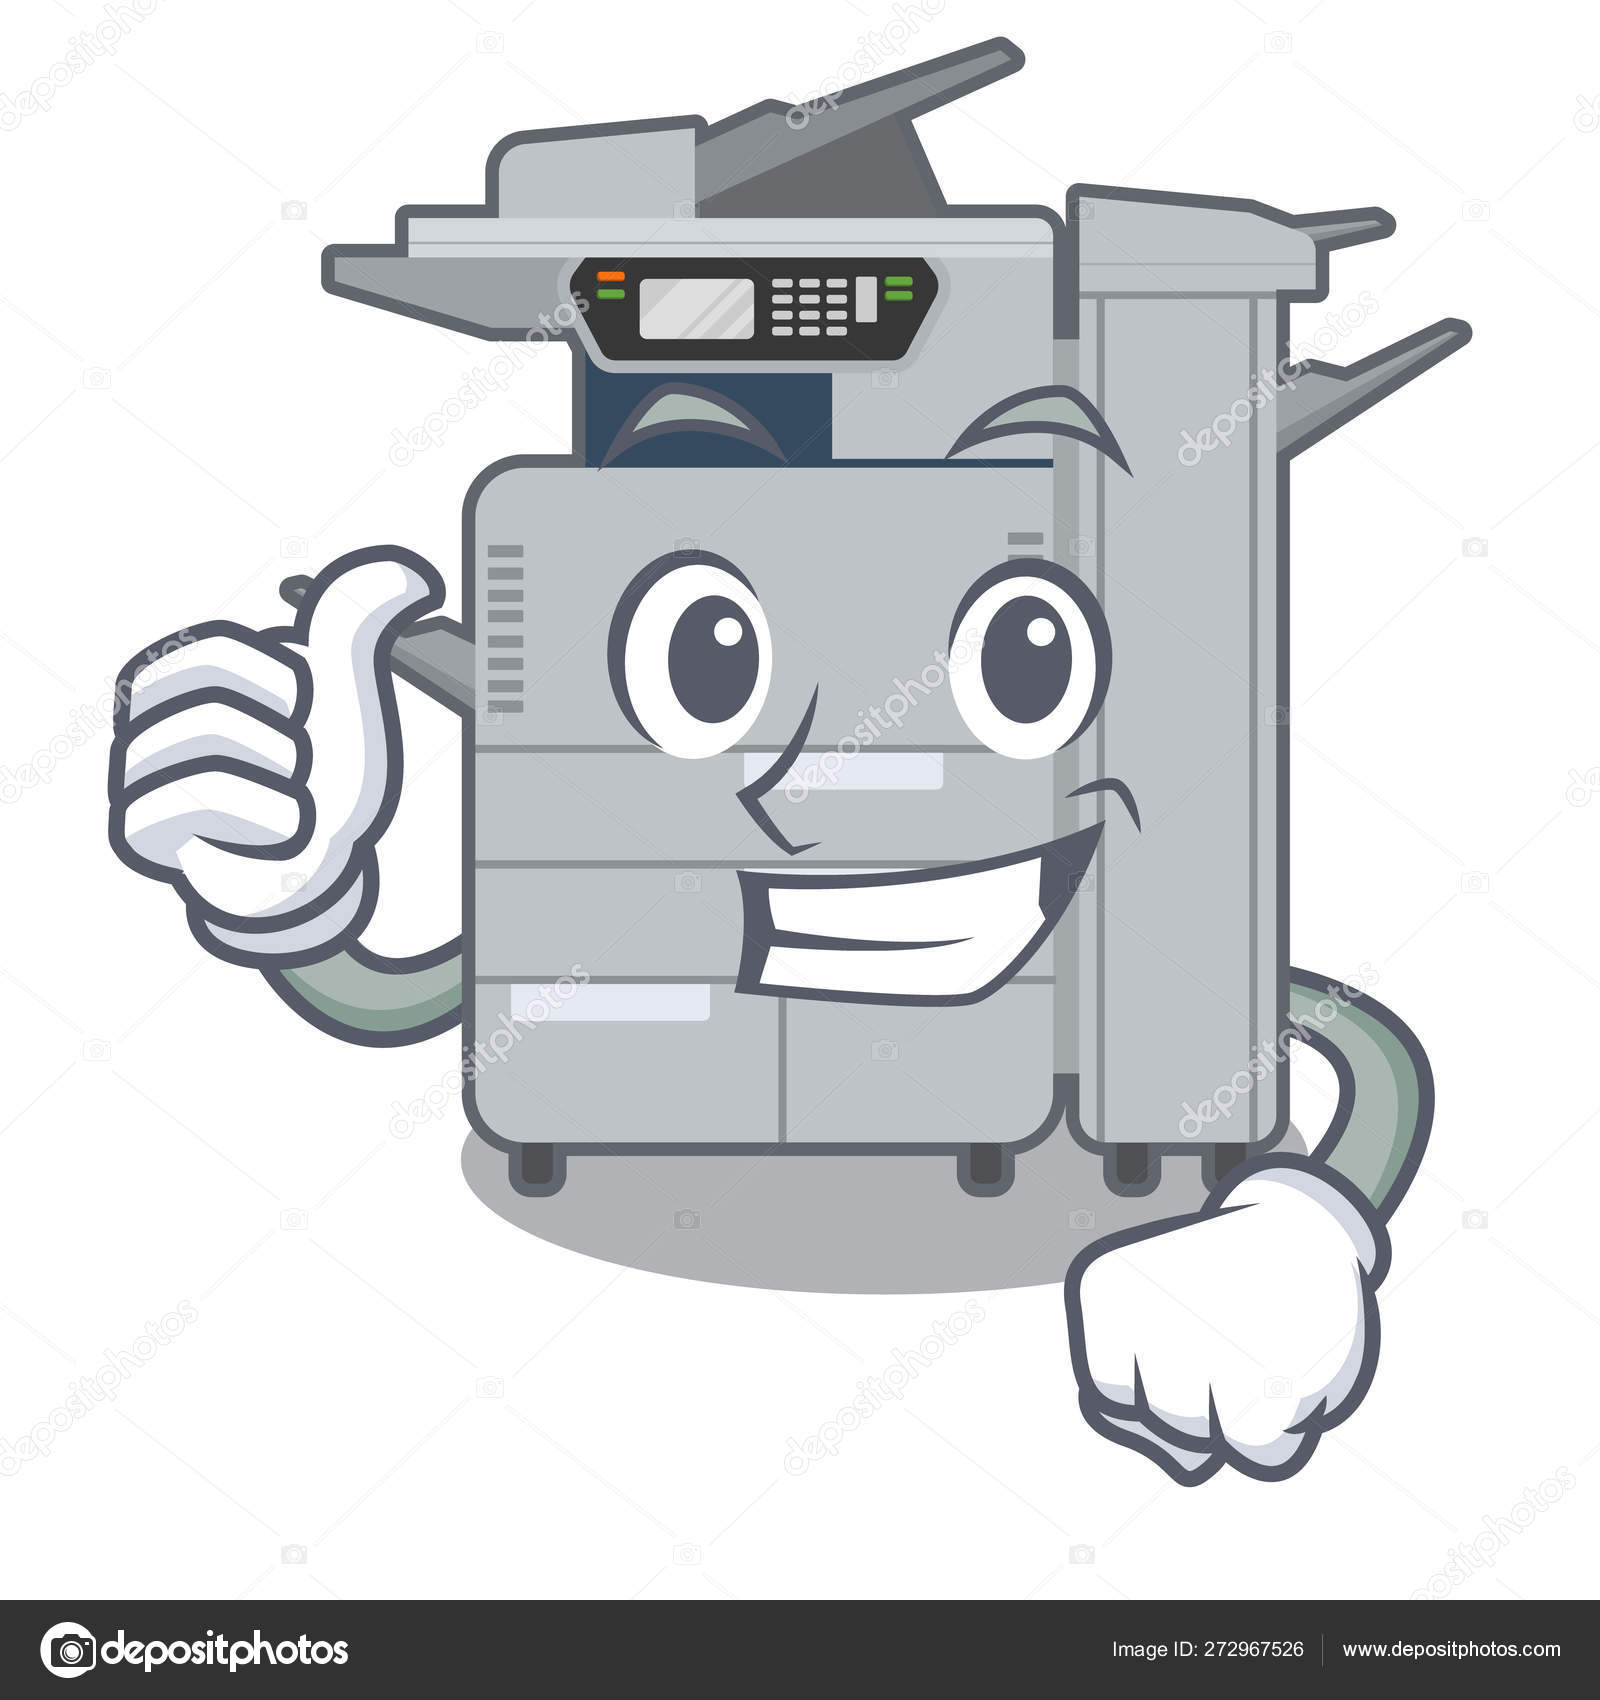 Photocopying Vector Art Stock Images | Depositphotos